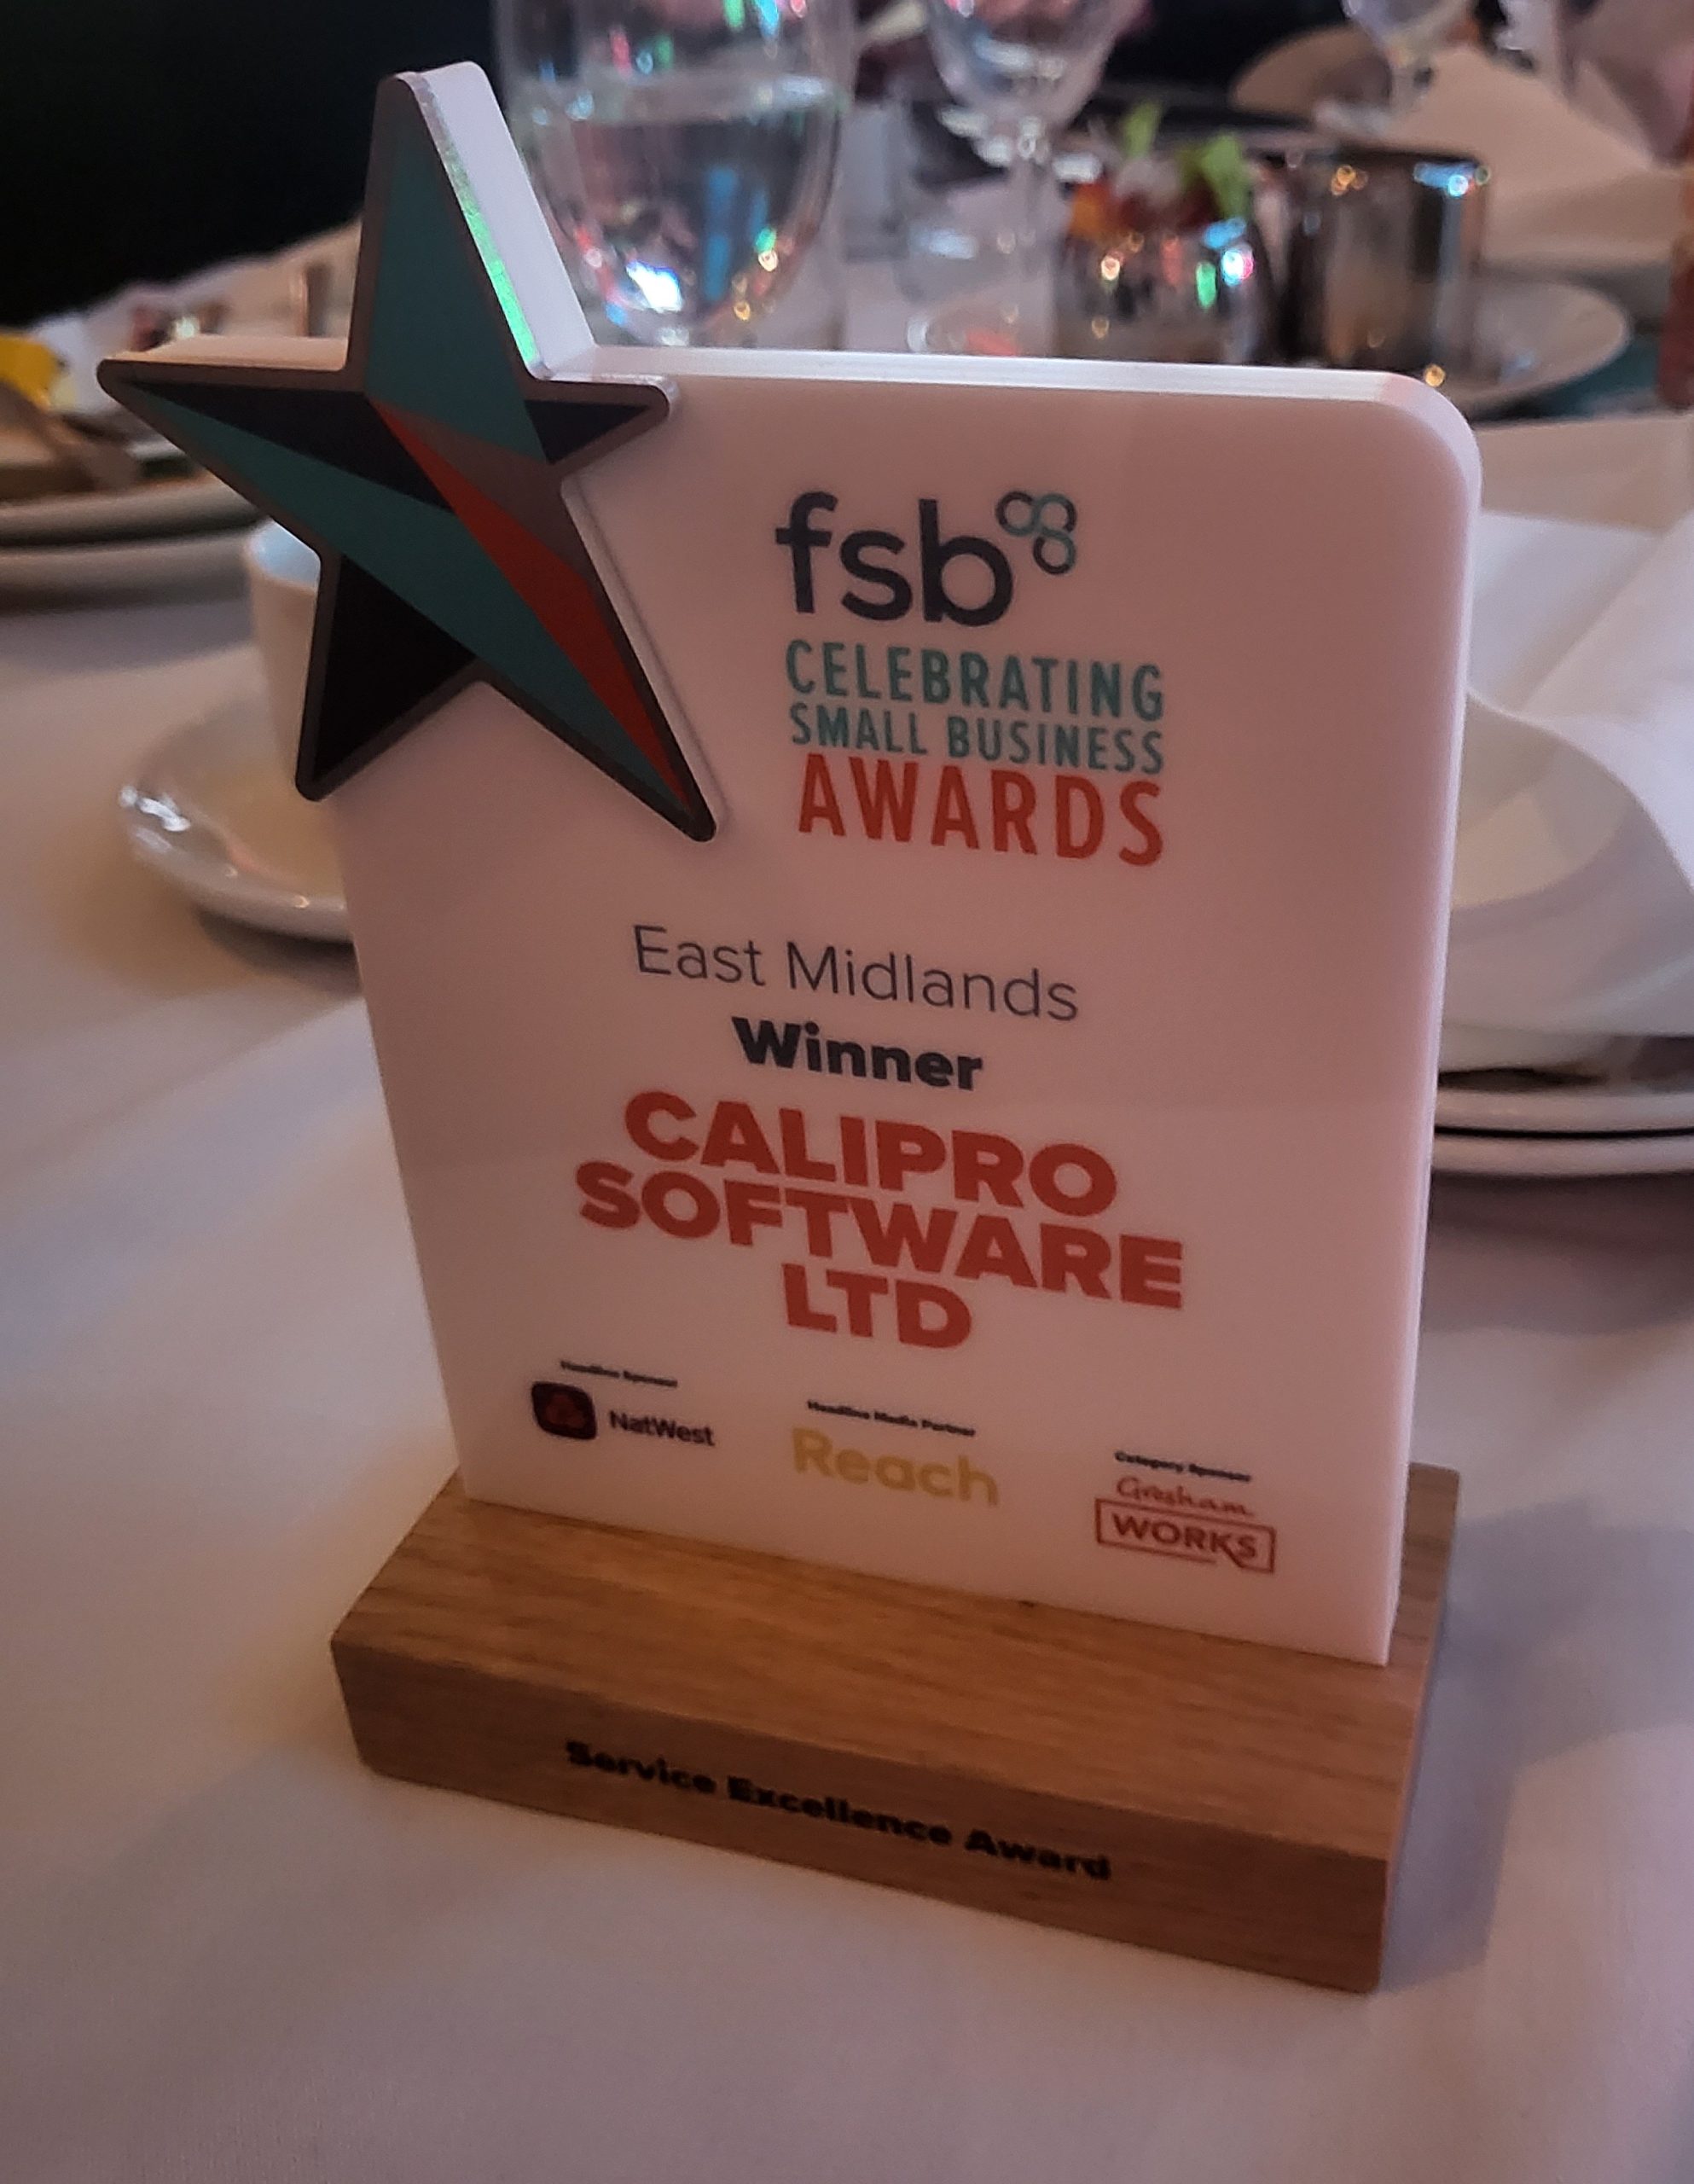 Leicester based CaliPro Software Ltd wins major  regional business award and is put through to National finals in May